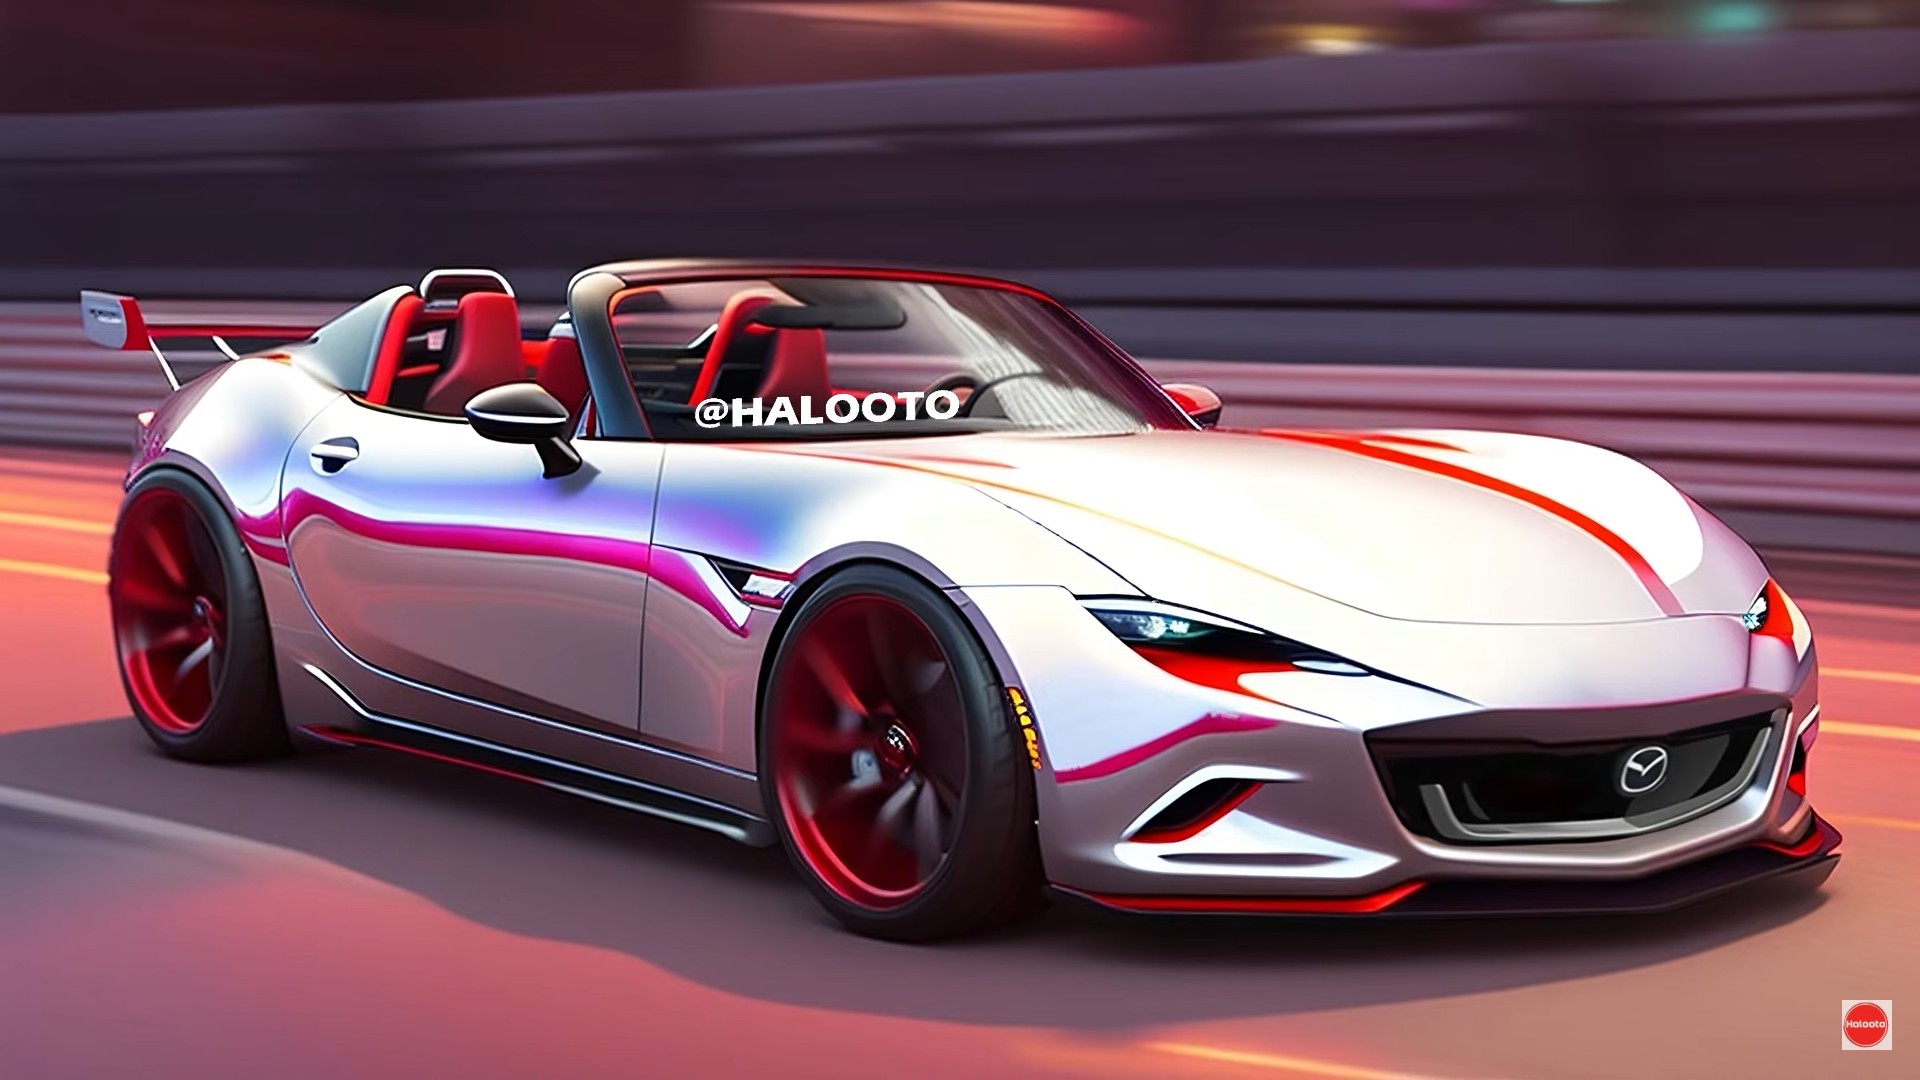 https://s1.cdn.autoevolution.com/images/news/here-s-a-sneak-peek-at-the-2028-mazda-mx-5-miata-ev-but-is-it-really-believable-218890_1.jpg